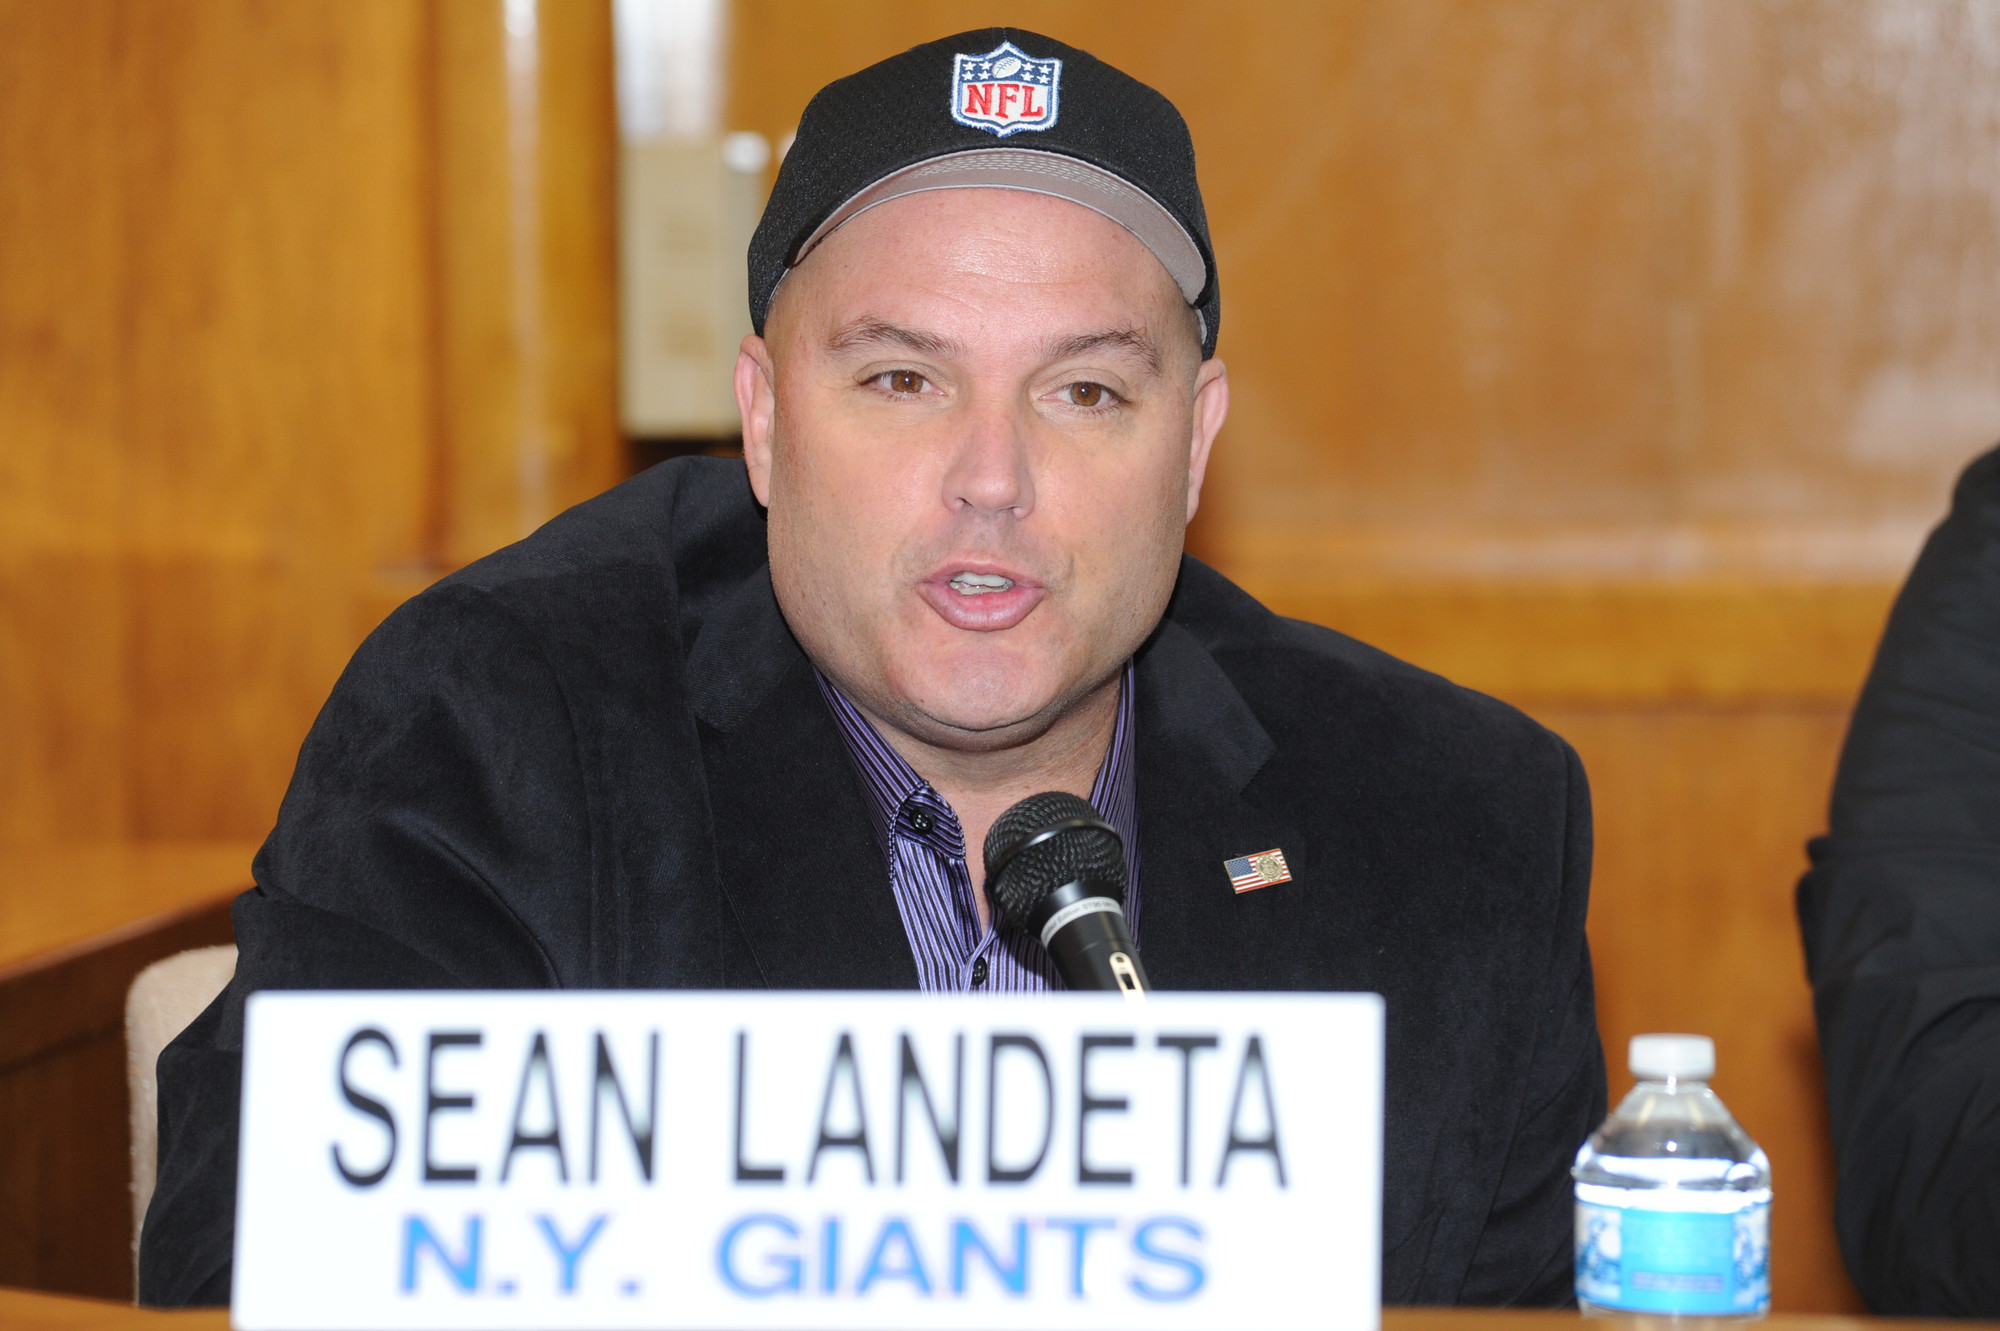 Sean Landeta, a former Giant, also played for the packers for one season